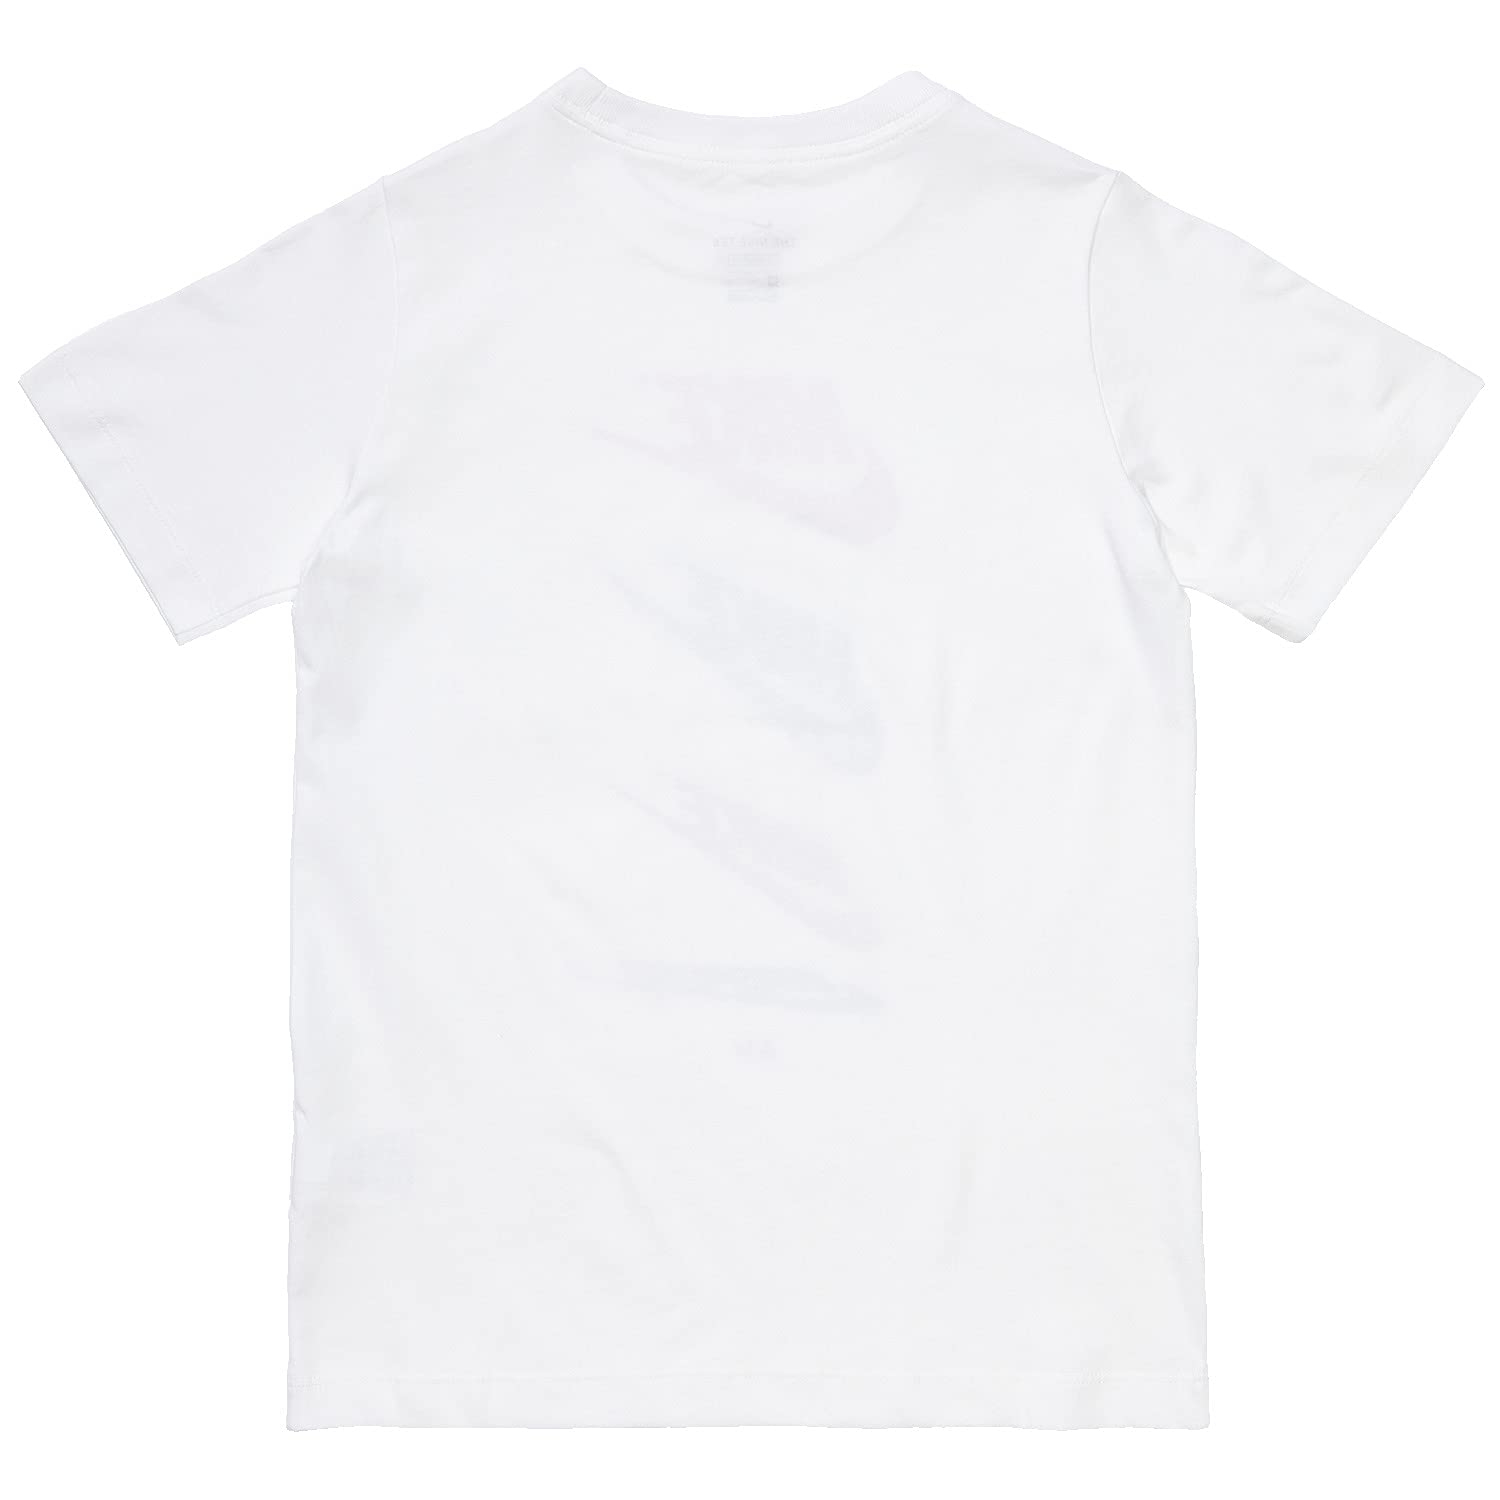 Image 2 of Sportswear Futura Repeat Tee - Extended Size (Big Kids)